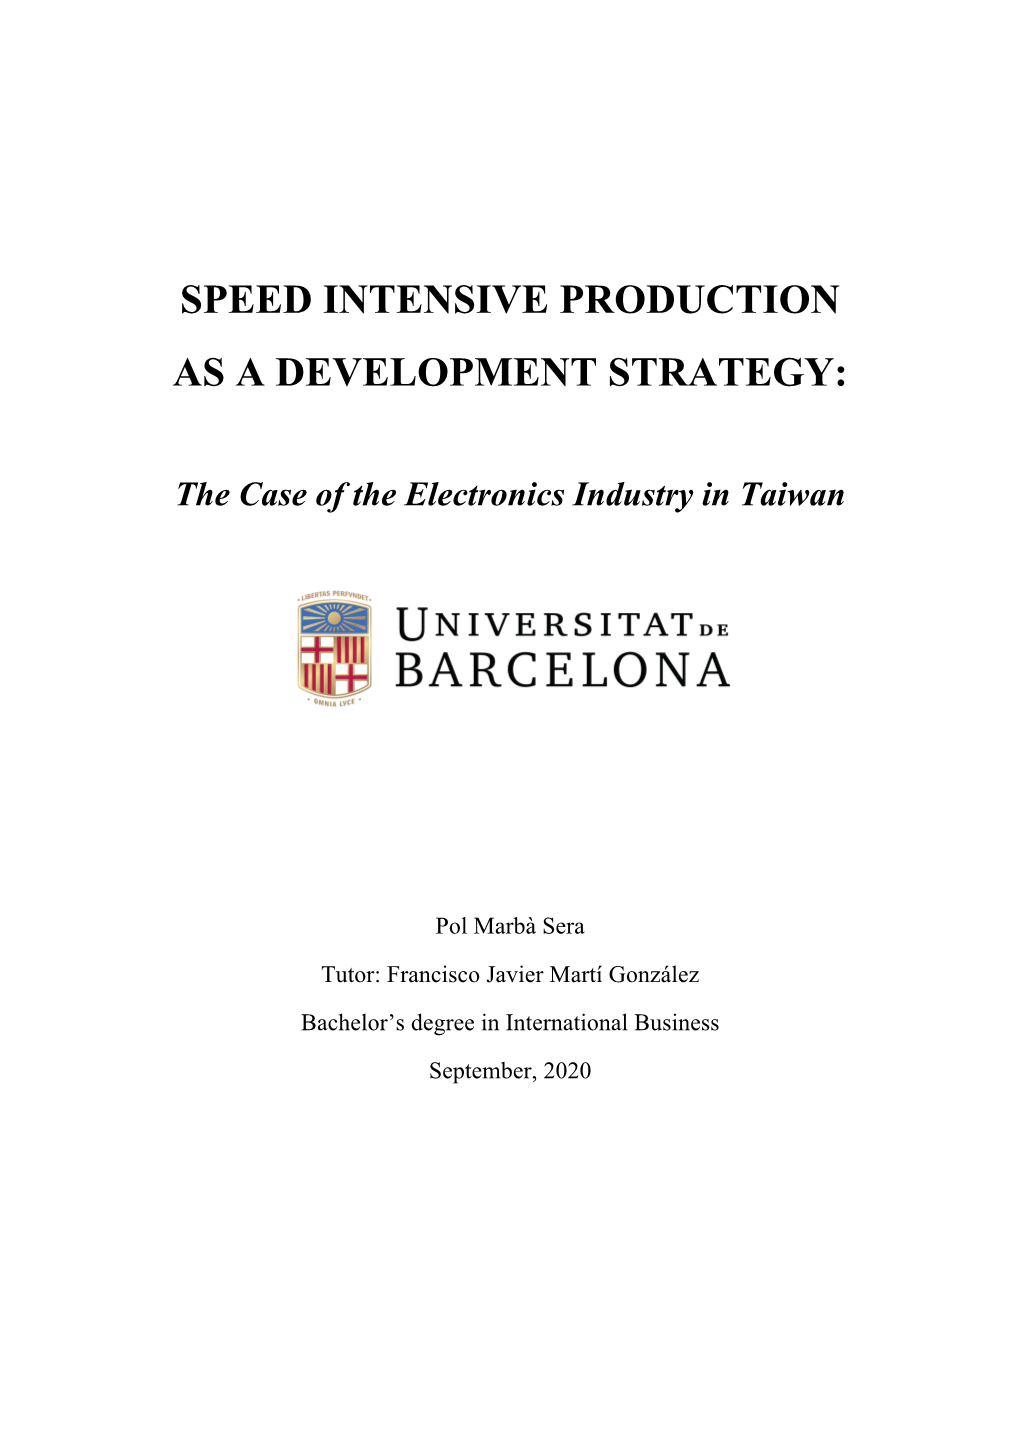 Speed Intensive Production As a Development Strategy